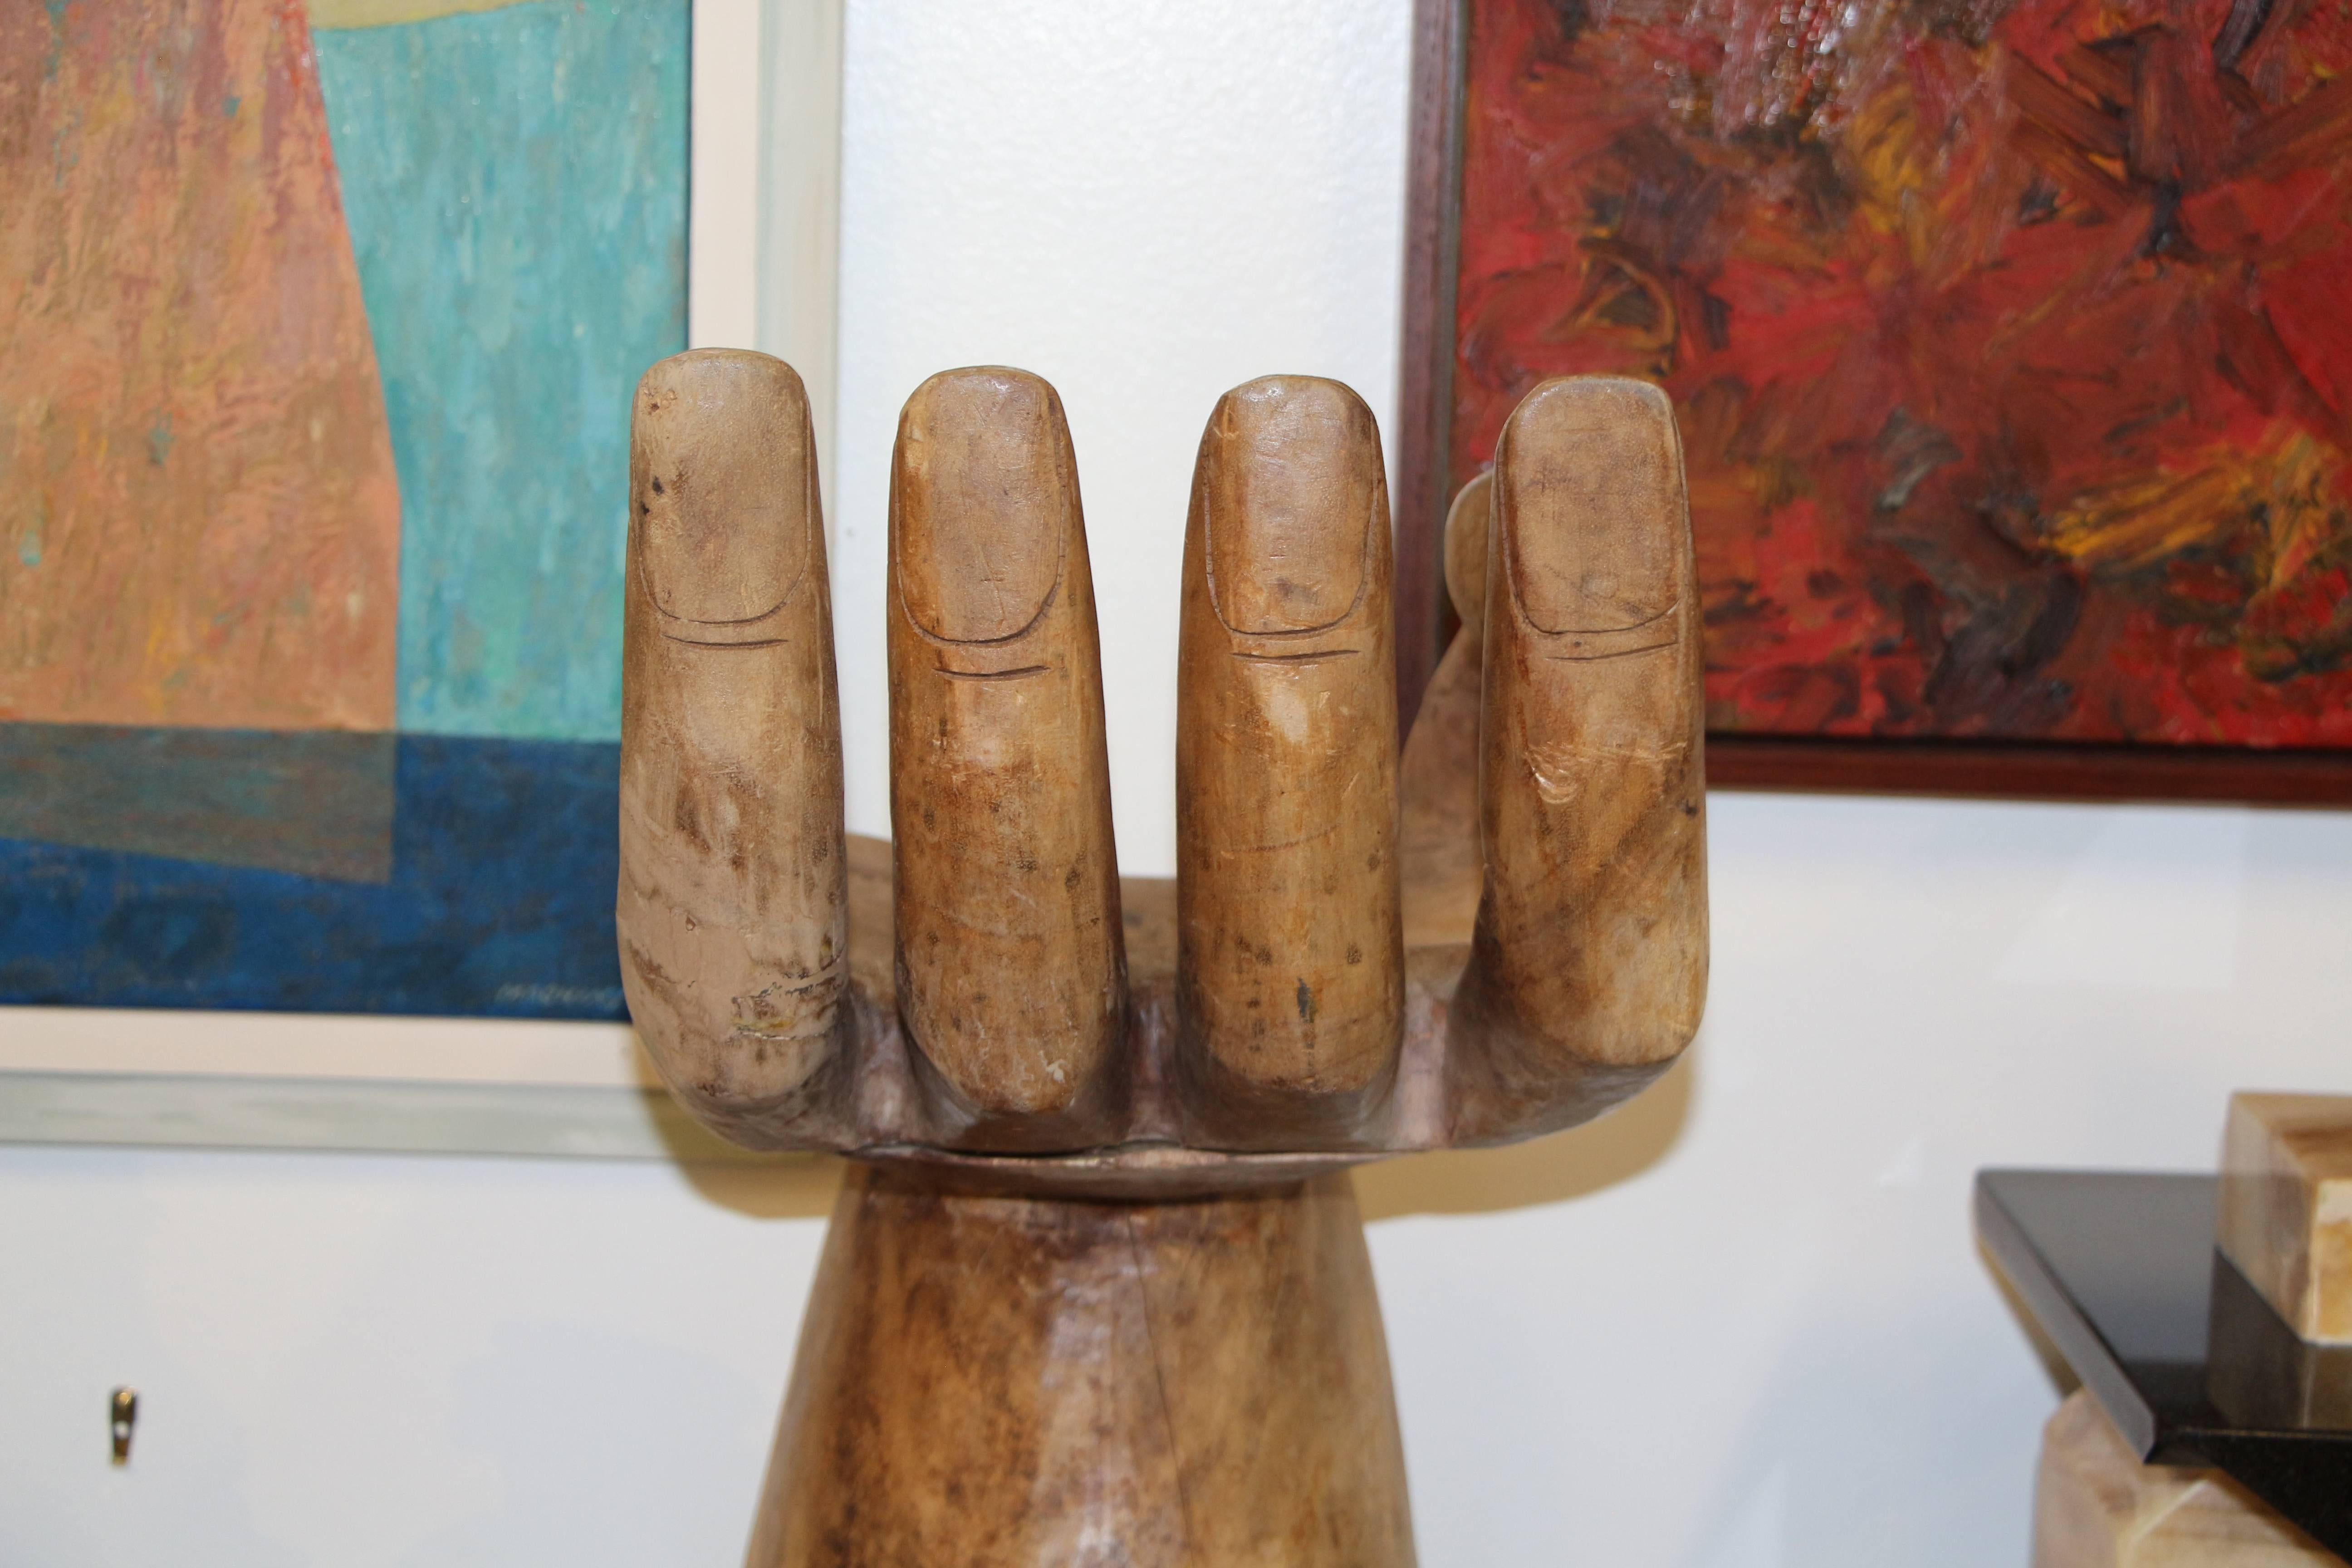 A nicely done sculpture in wood of a Pedro Fiedeberg hand chair. It appears to have some age as there is quite a bit of wear and repairs. There is cracking as well, please see the detailed photos. it is not signed. 
Please take a moment to have a